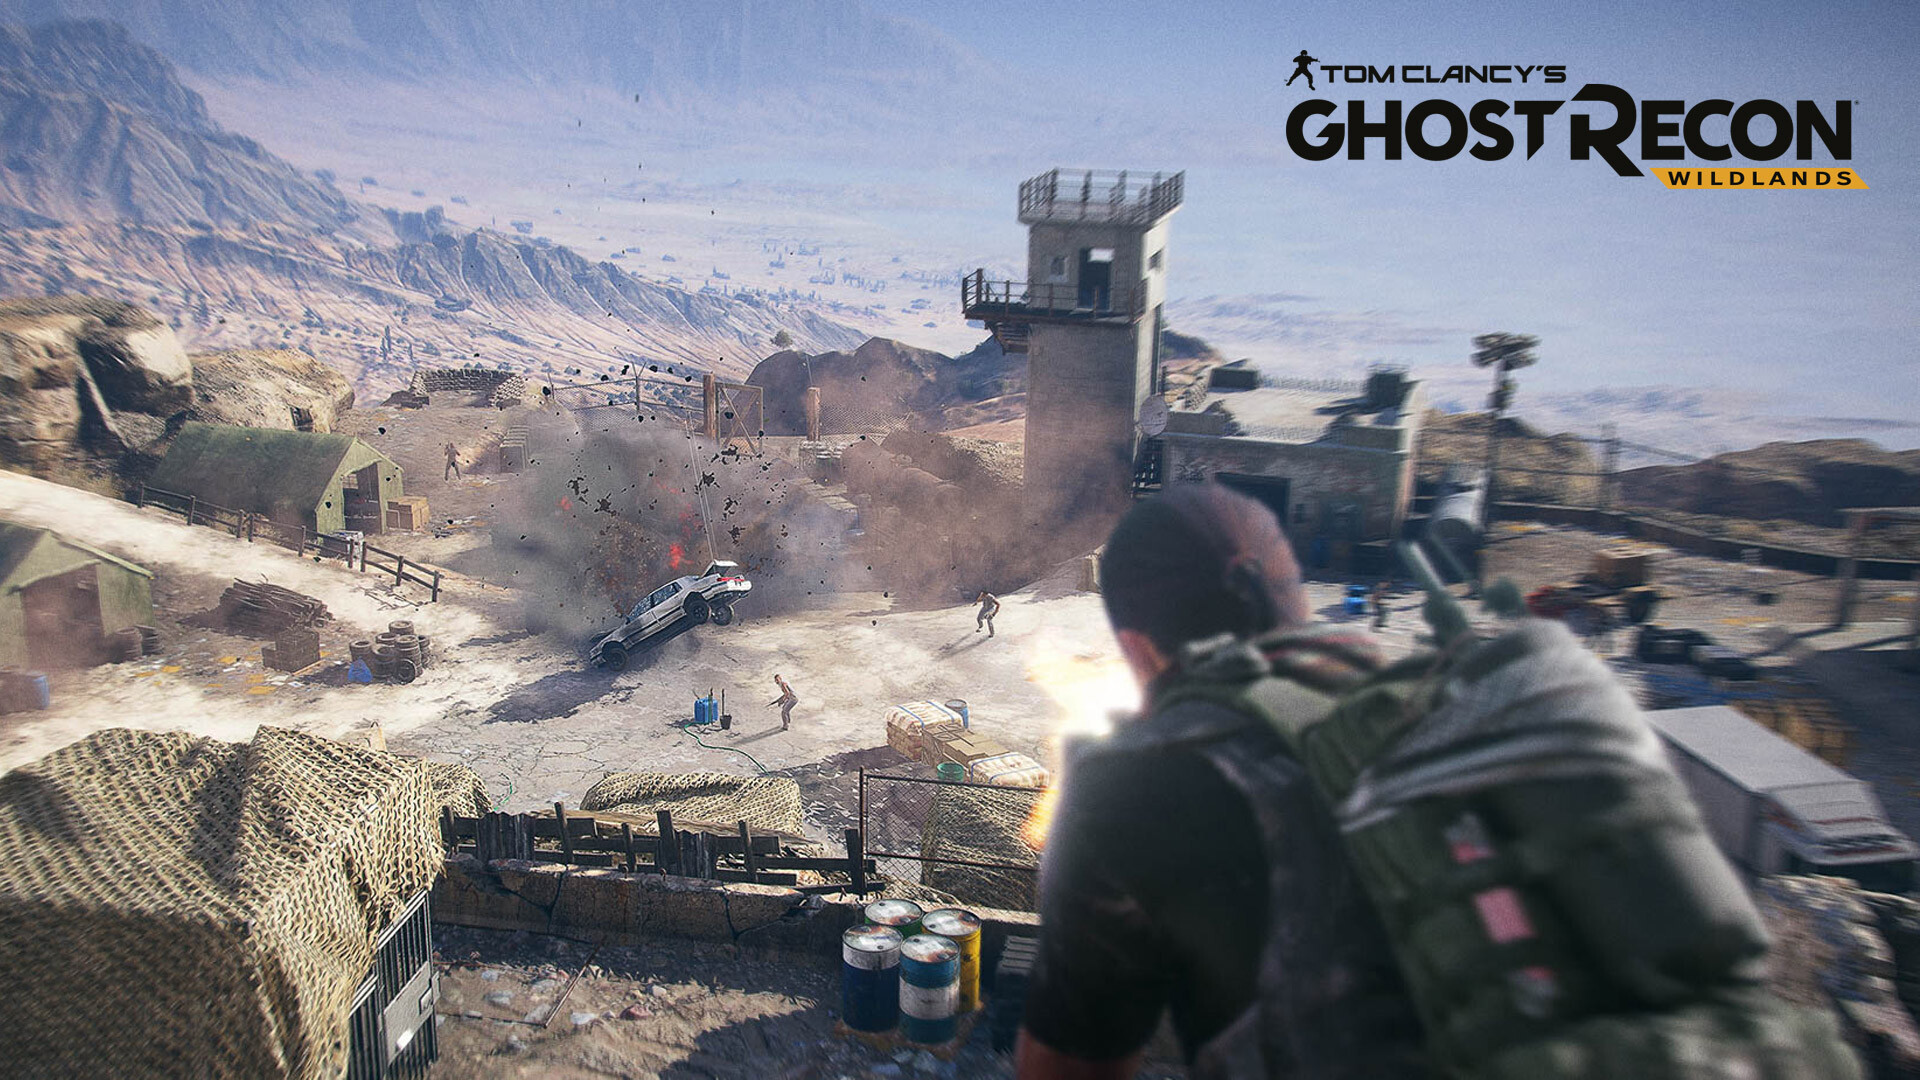 Ghost Recon: Wildlands: One of the biggest open-world games that Ubisoft has published, The tenth installment in the franchise. 1920x1080 Full HD Background.